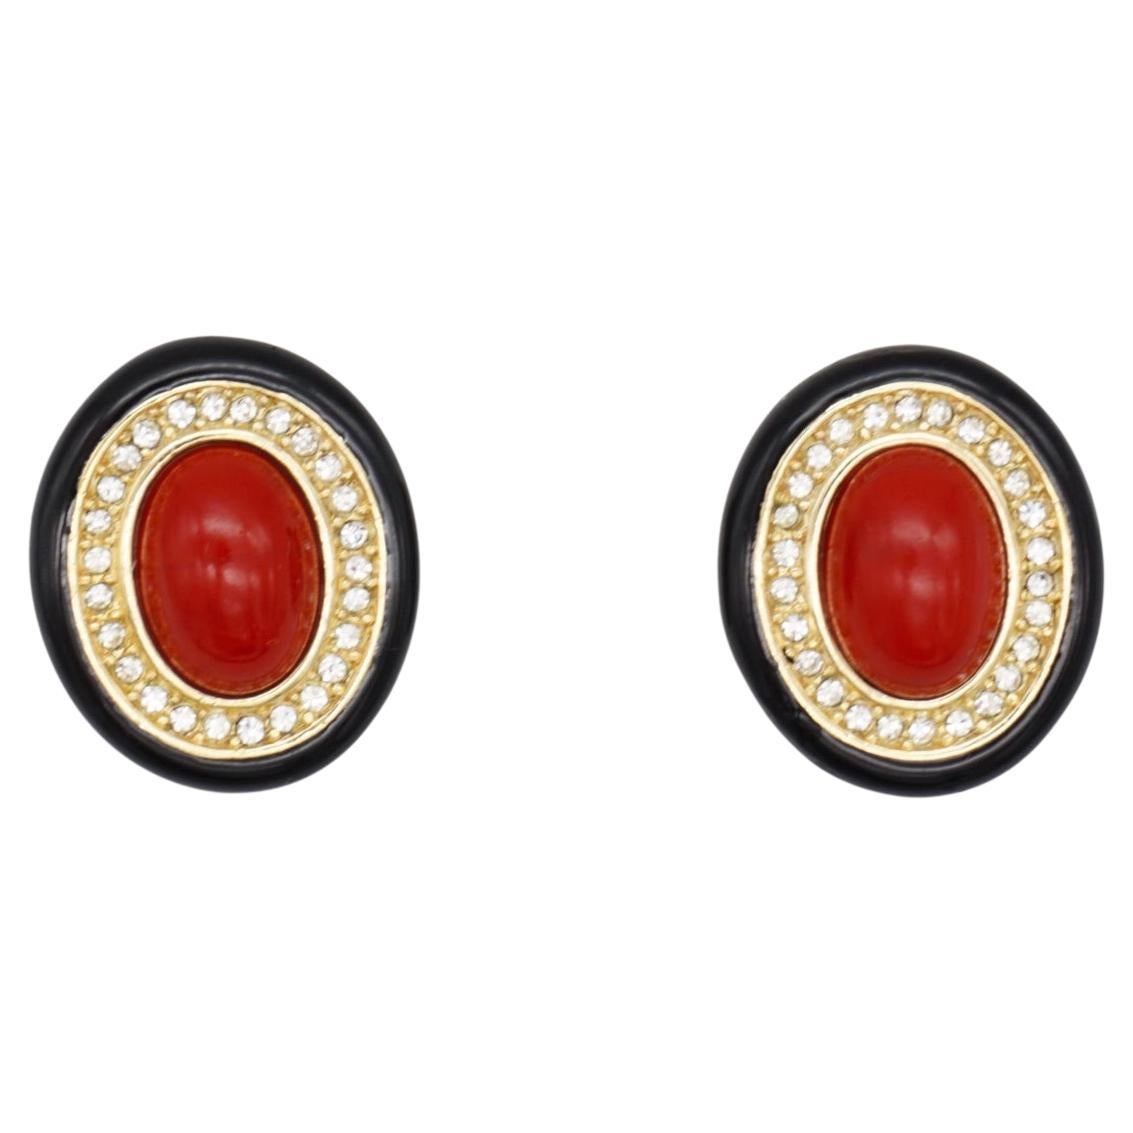 Christian Dior GROSSE 1970s Large Red Oval Pearl Crystals Black Clip Earrings For Sale